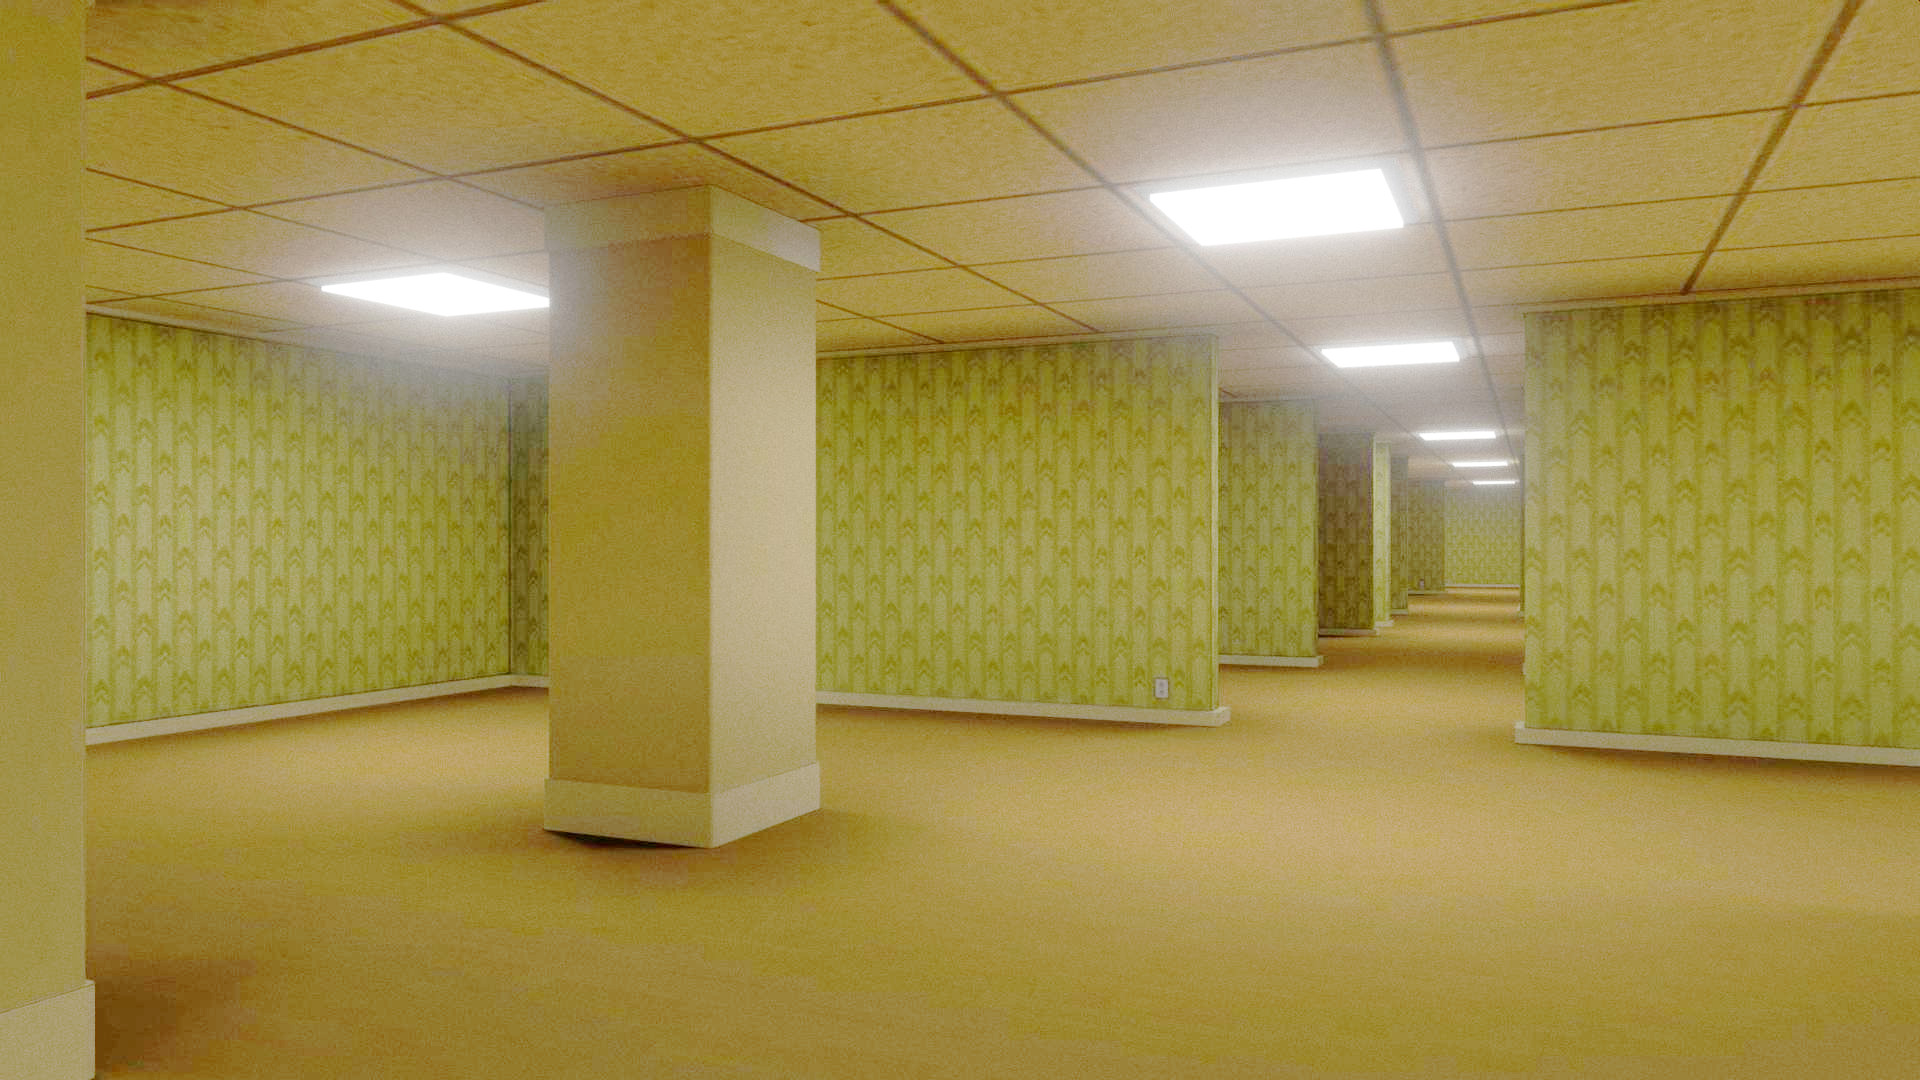 A digital render of the Backrooms, which resembles an empty, dull yellow office space with no end in sight.